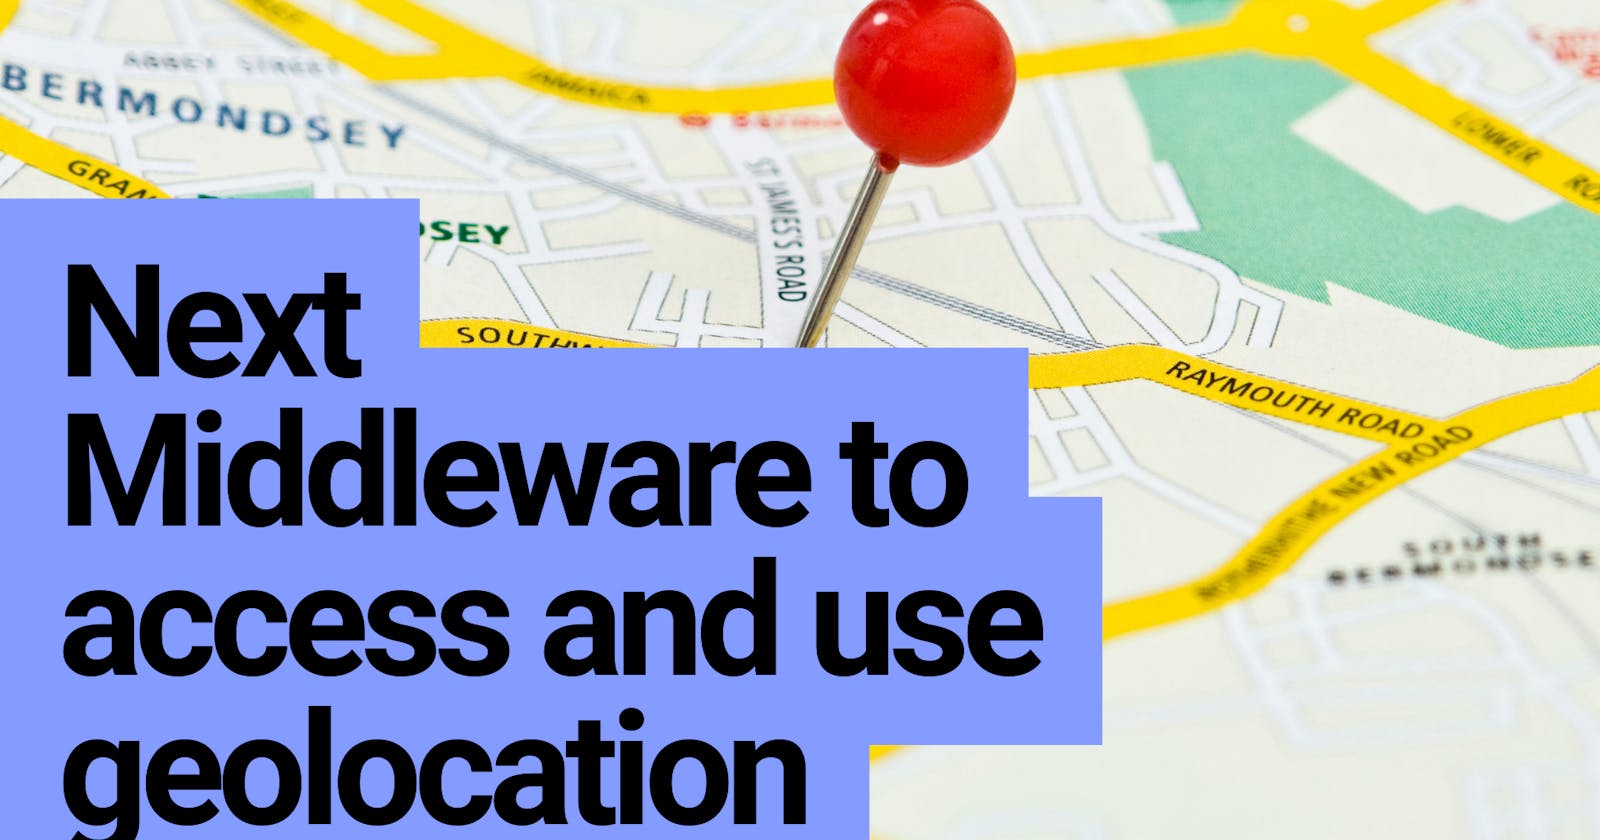 Using Next Middleware to access and use geolocation in a non dynamic route